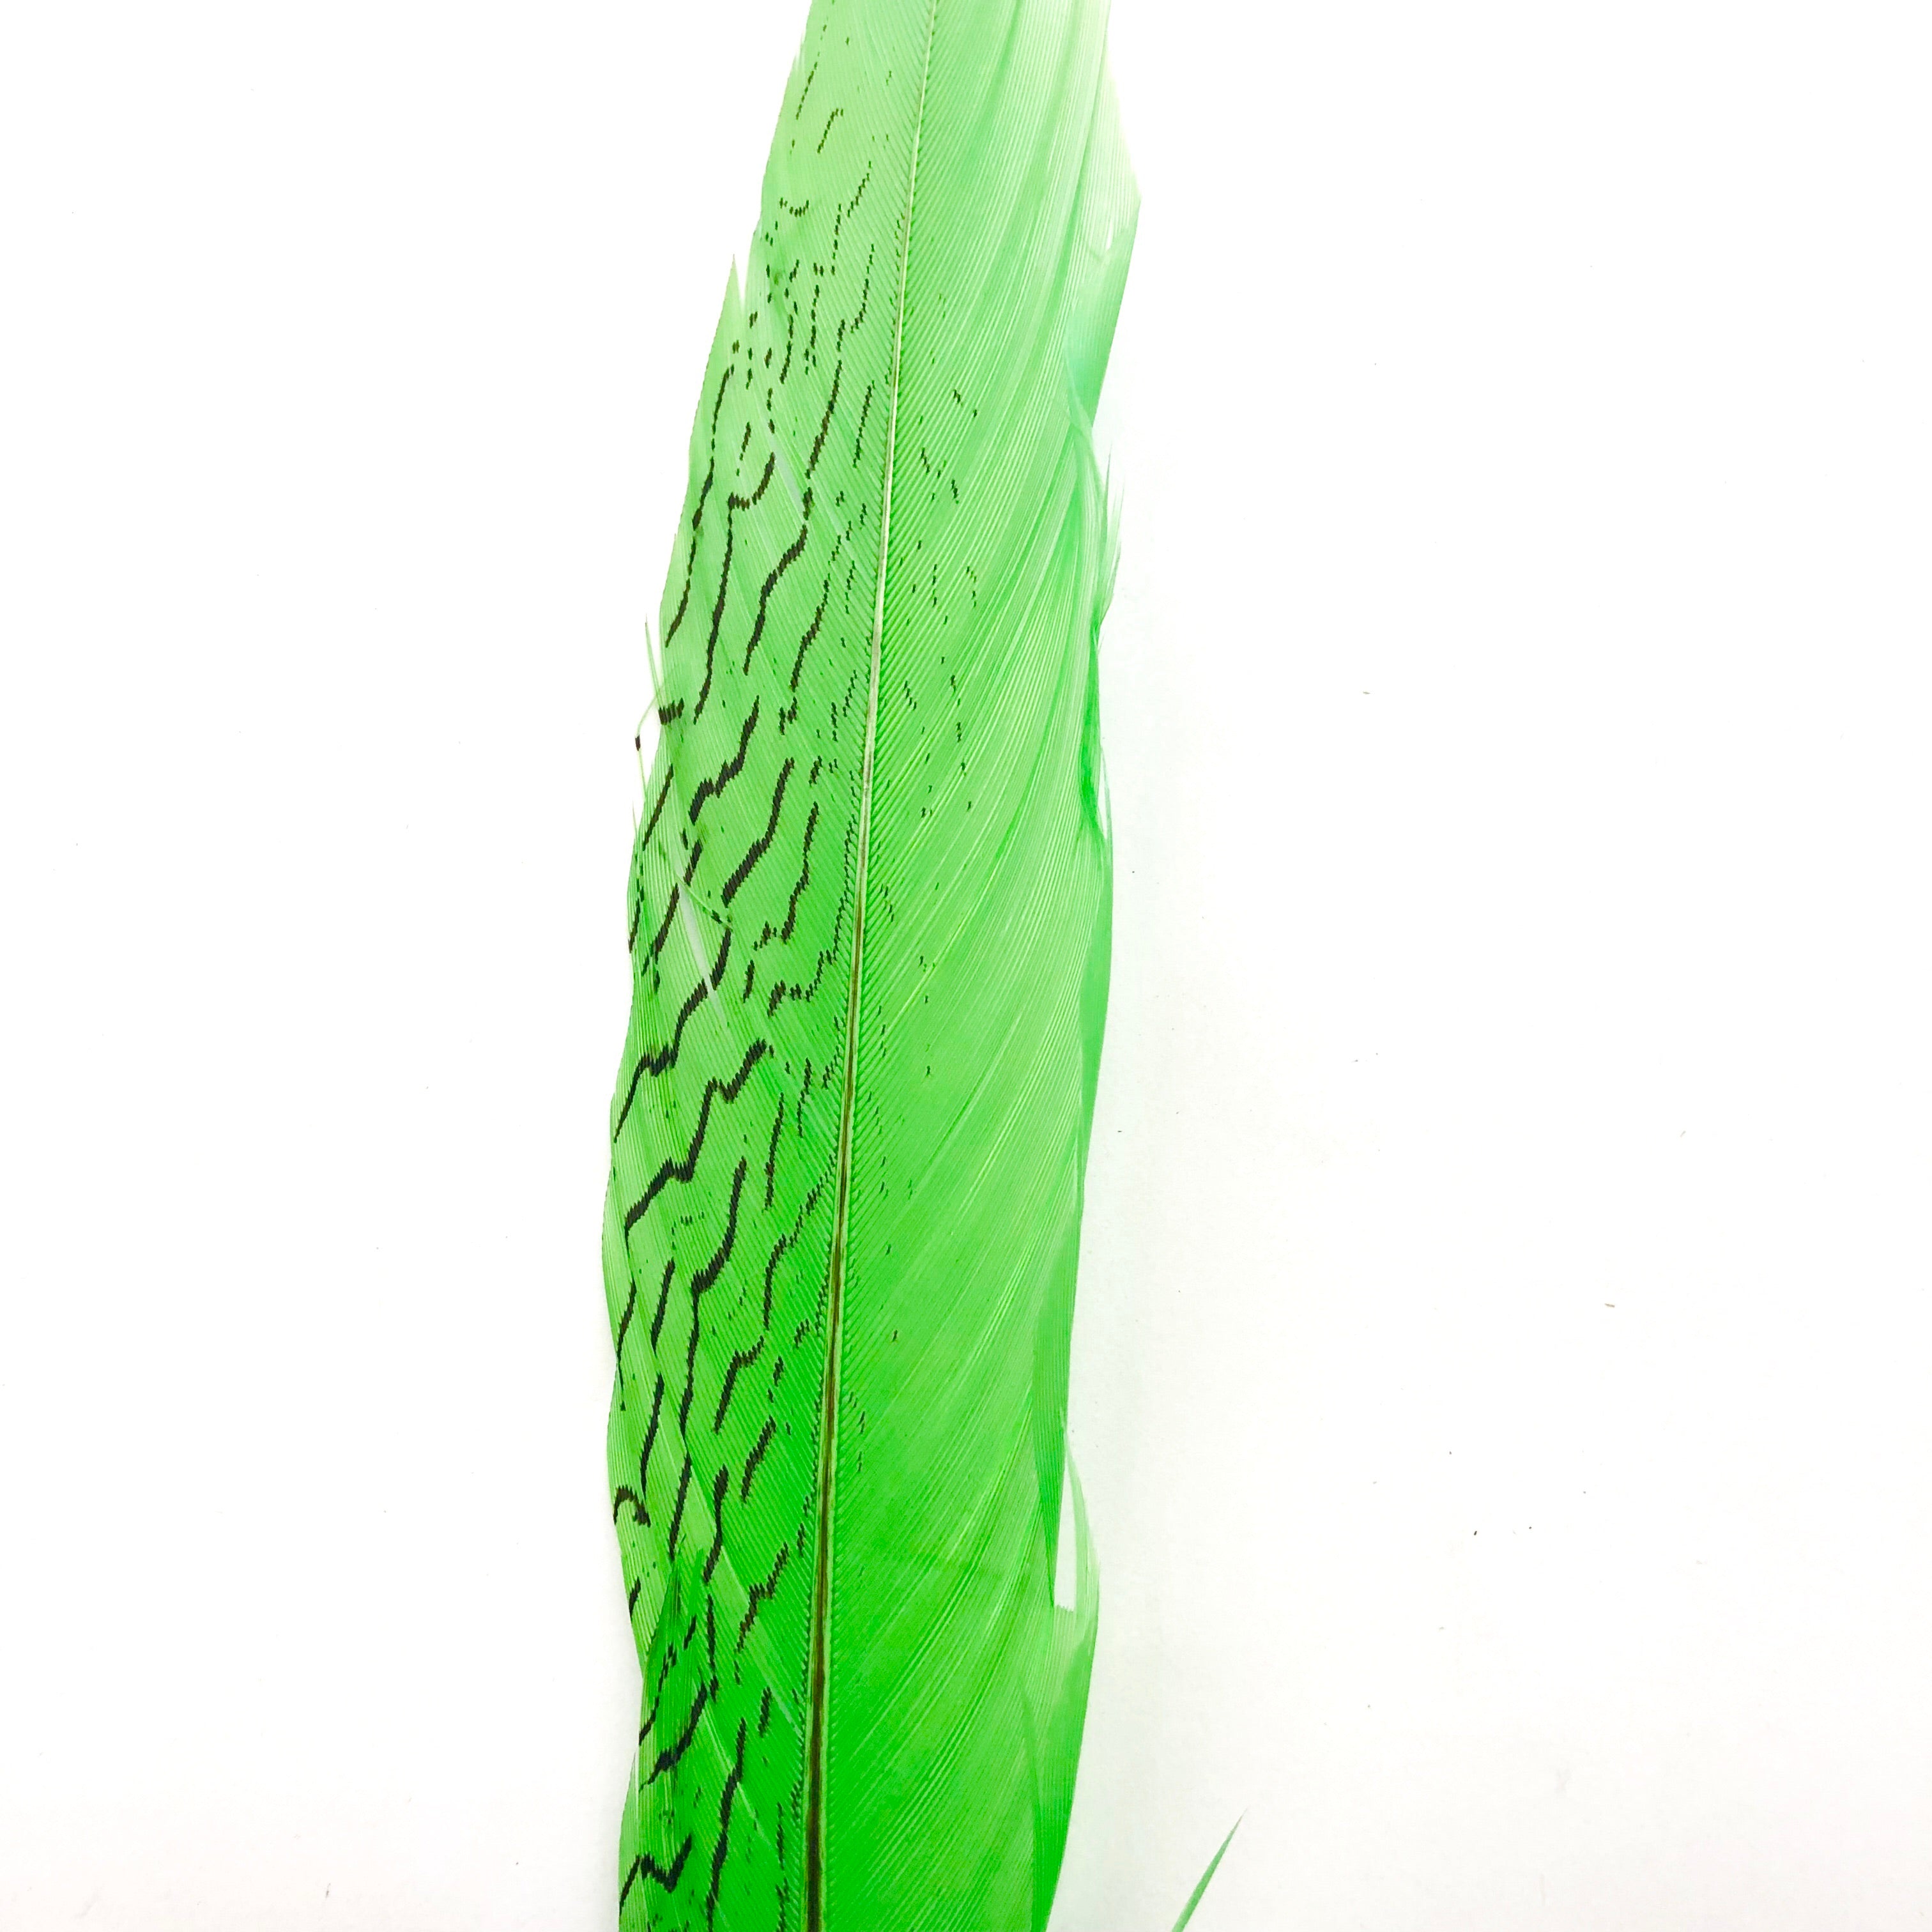 10" to 20" Silver Pheasant Tail Feather - Lime Green